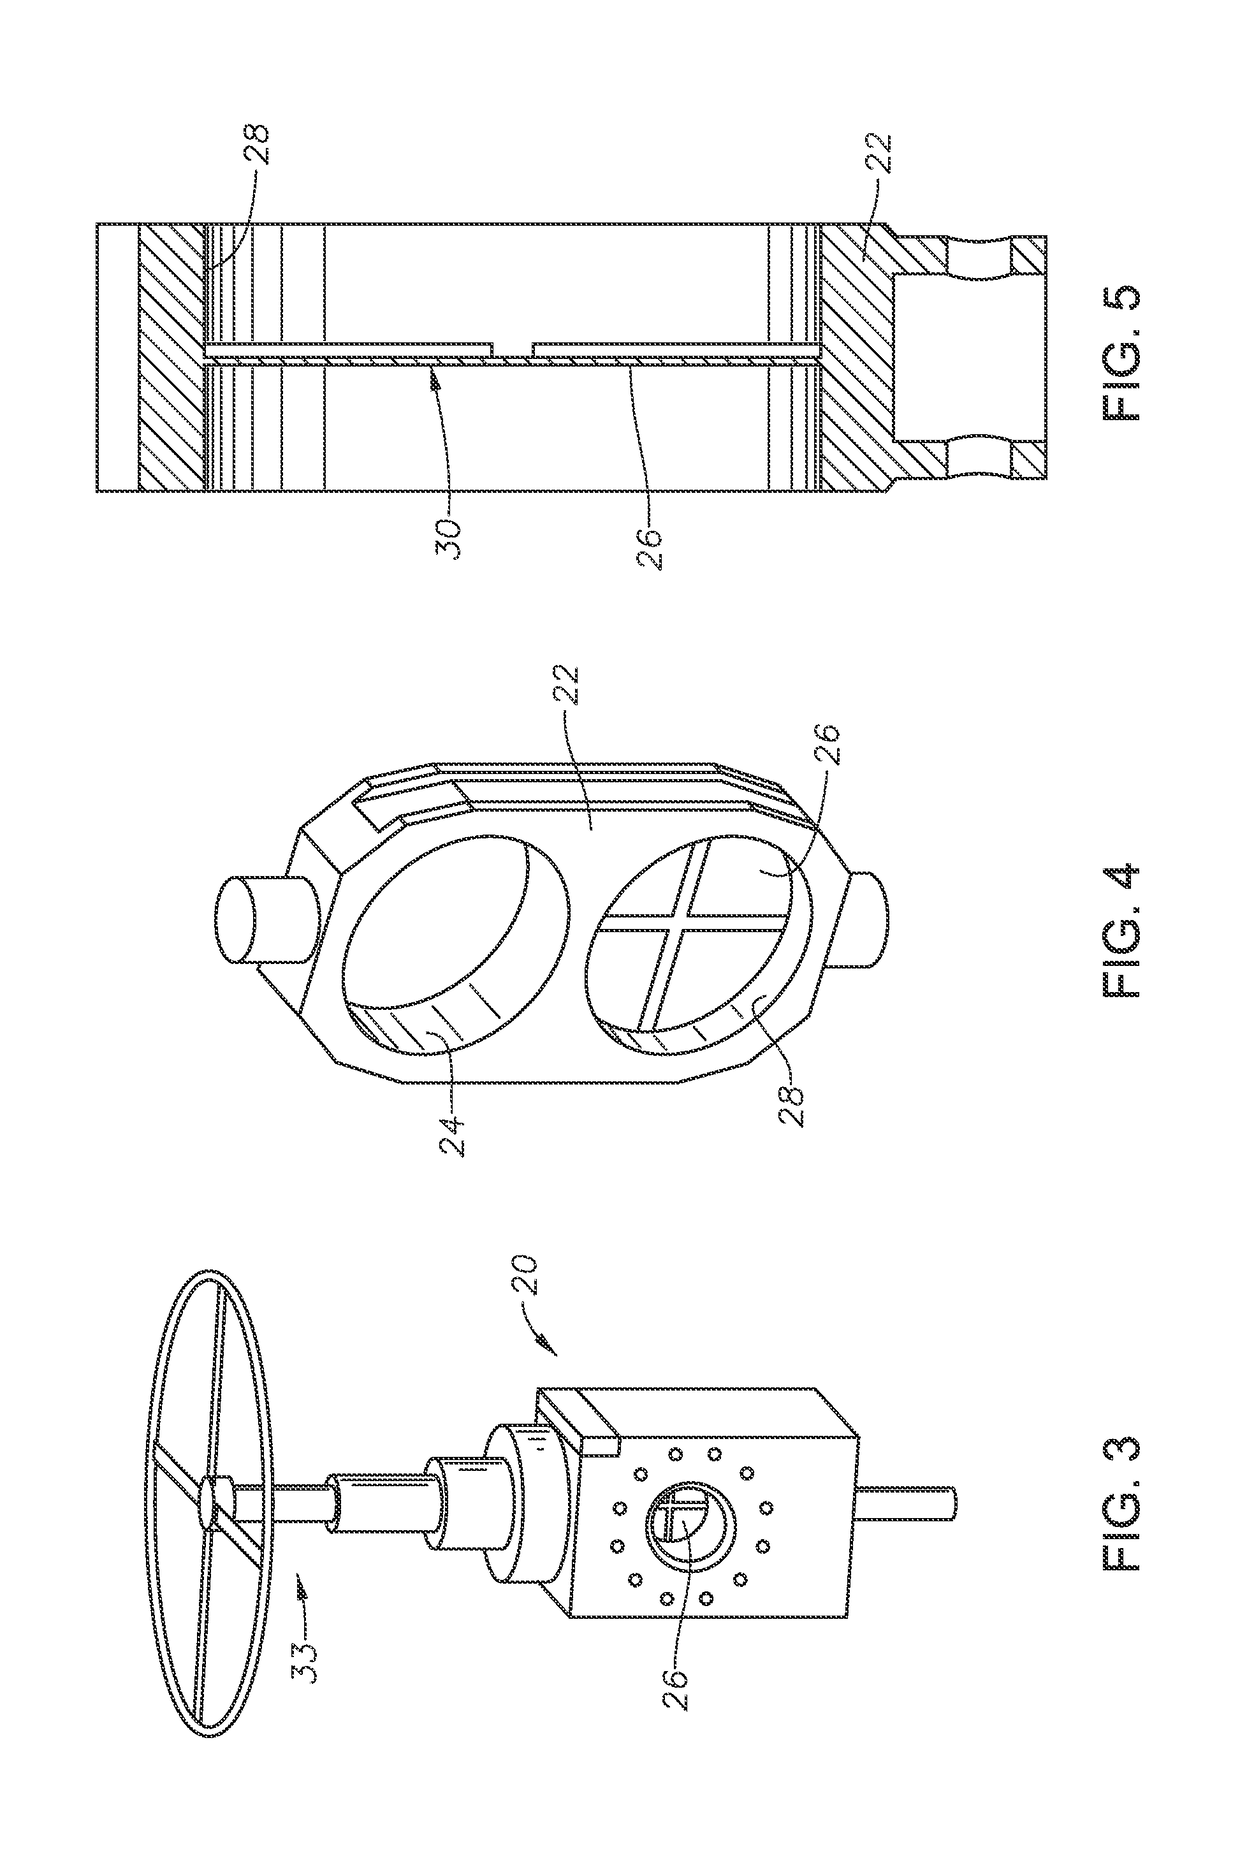 Safety systems for isolating overpressure during pressurized fluid operations